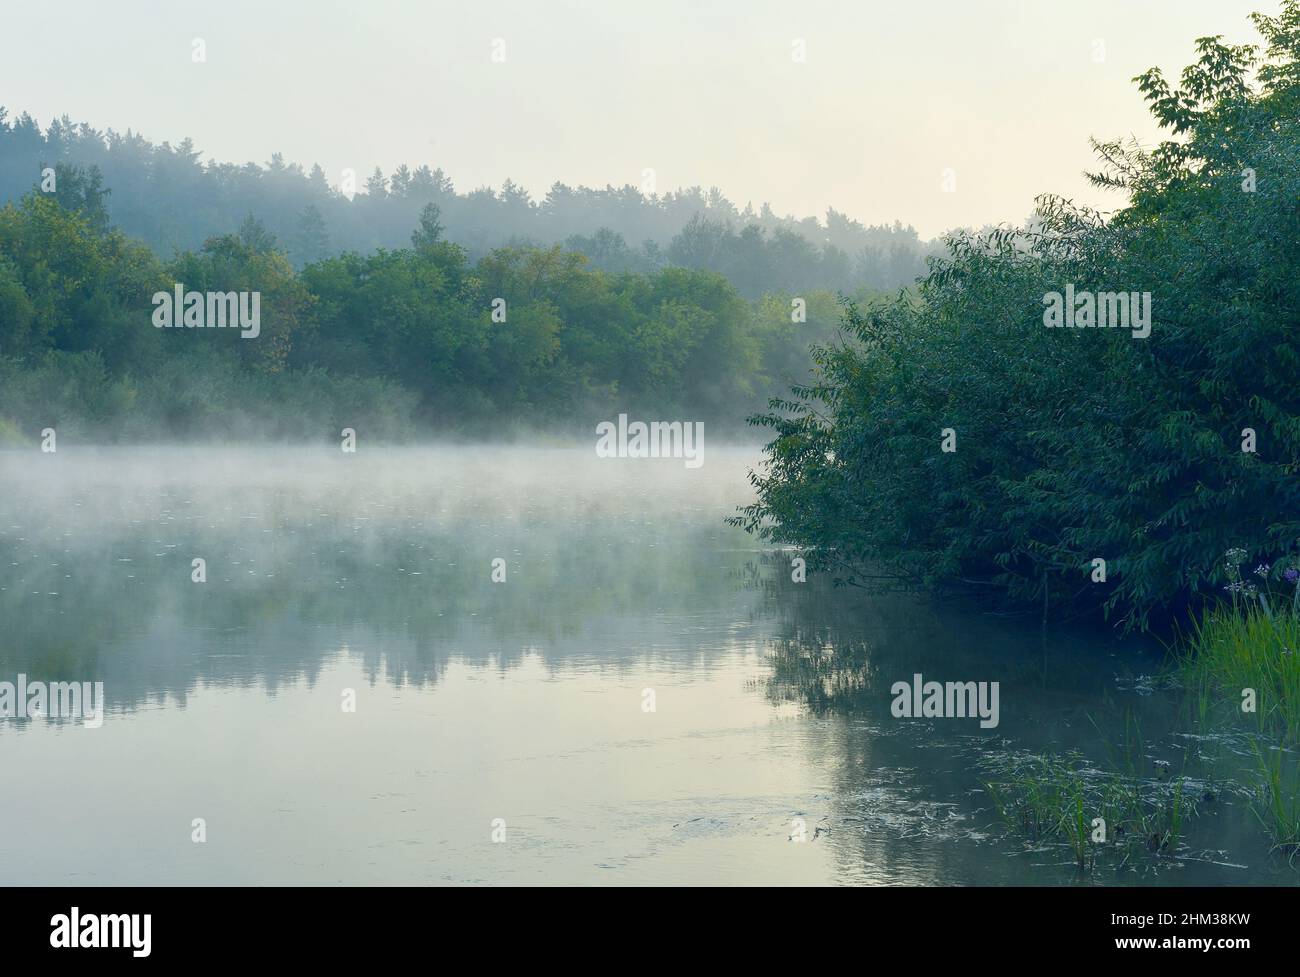 Bushes and trees on the river Bank, the calm surface of the water with reflections and creeping fog, trees on the horizon. A landscape of pure nature Stock Photo